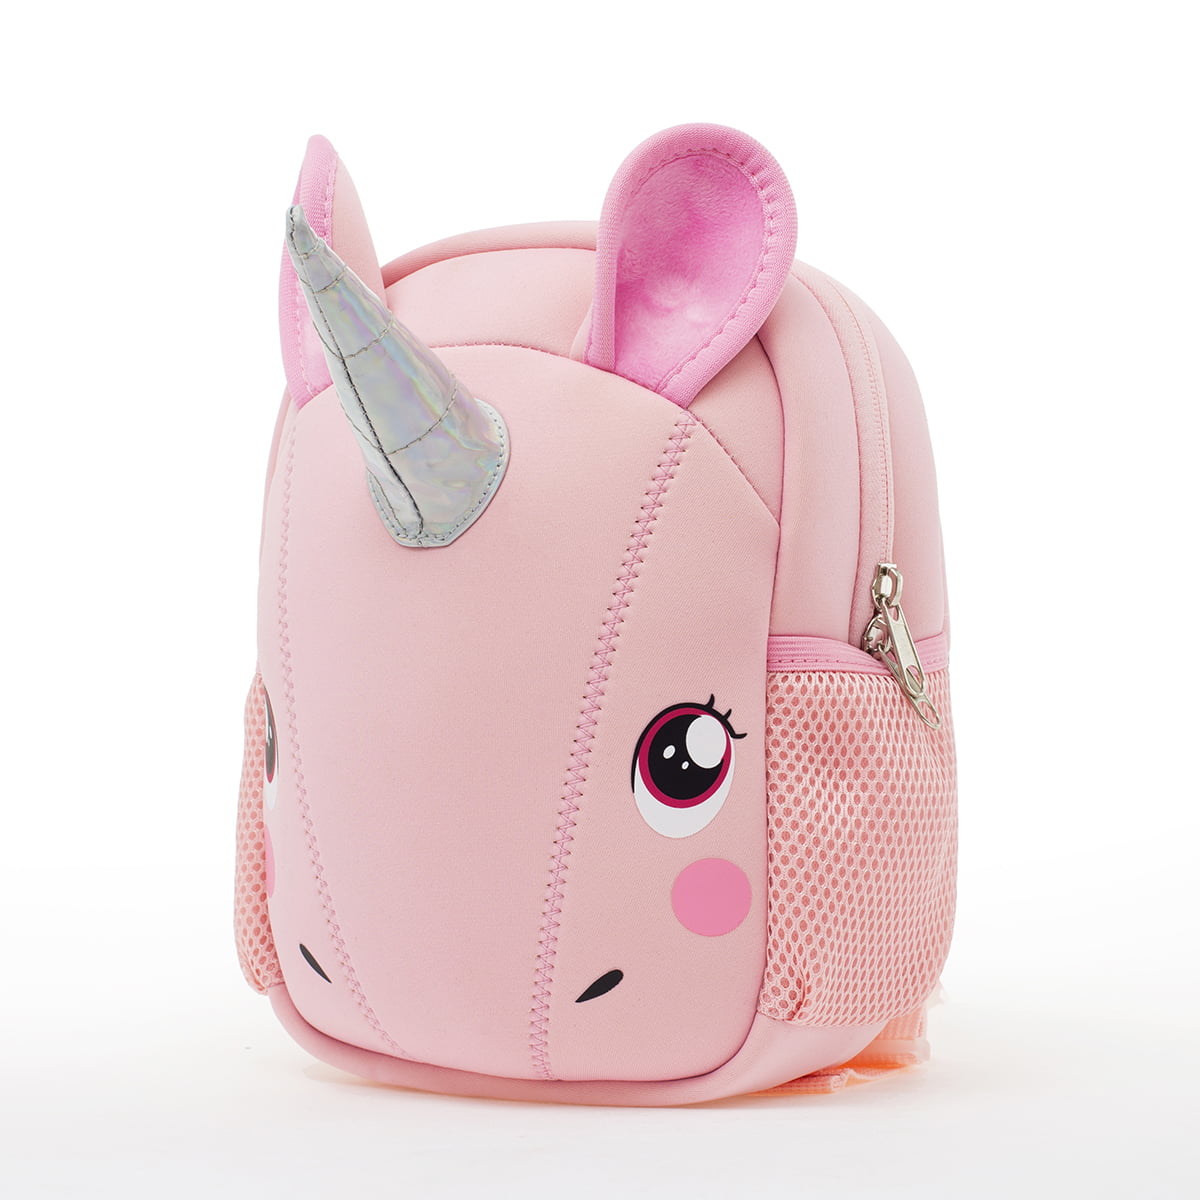 Wynmarts - Small Cute Unicorn Backpack with Detachable Leash and Side Pockets for Toddler Girls ...